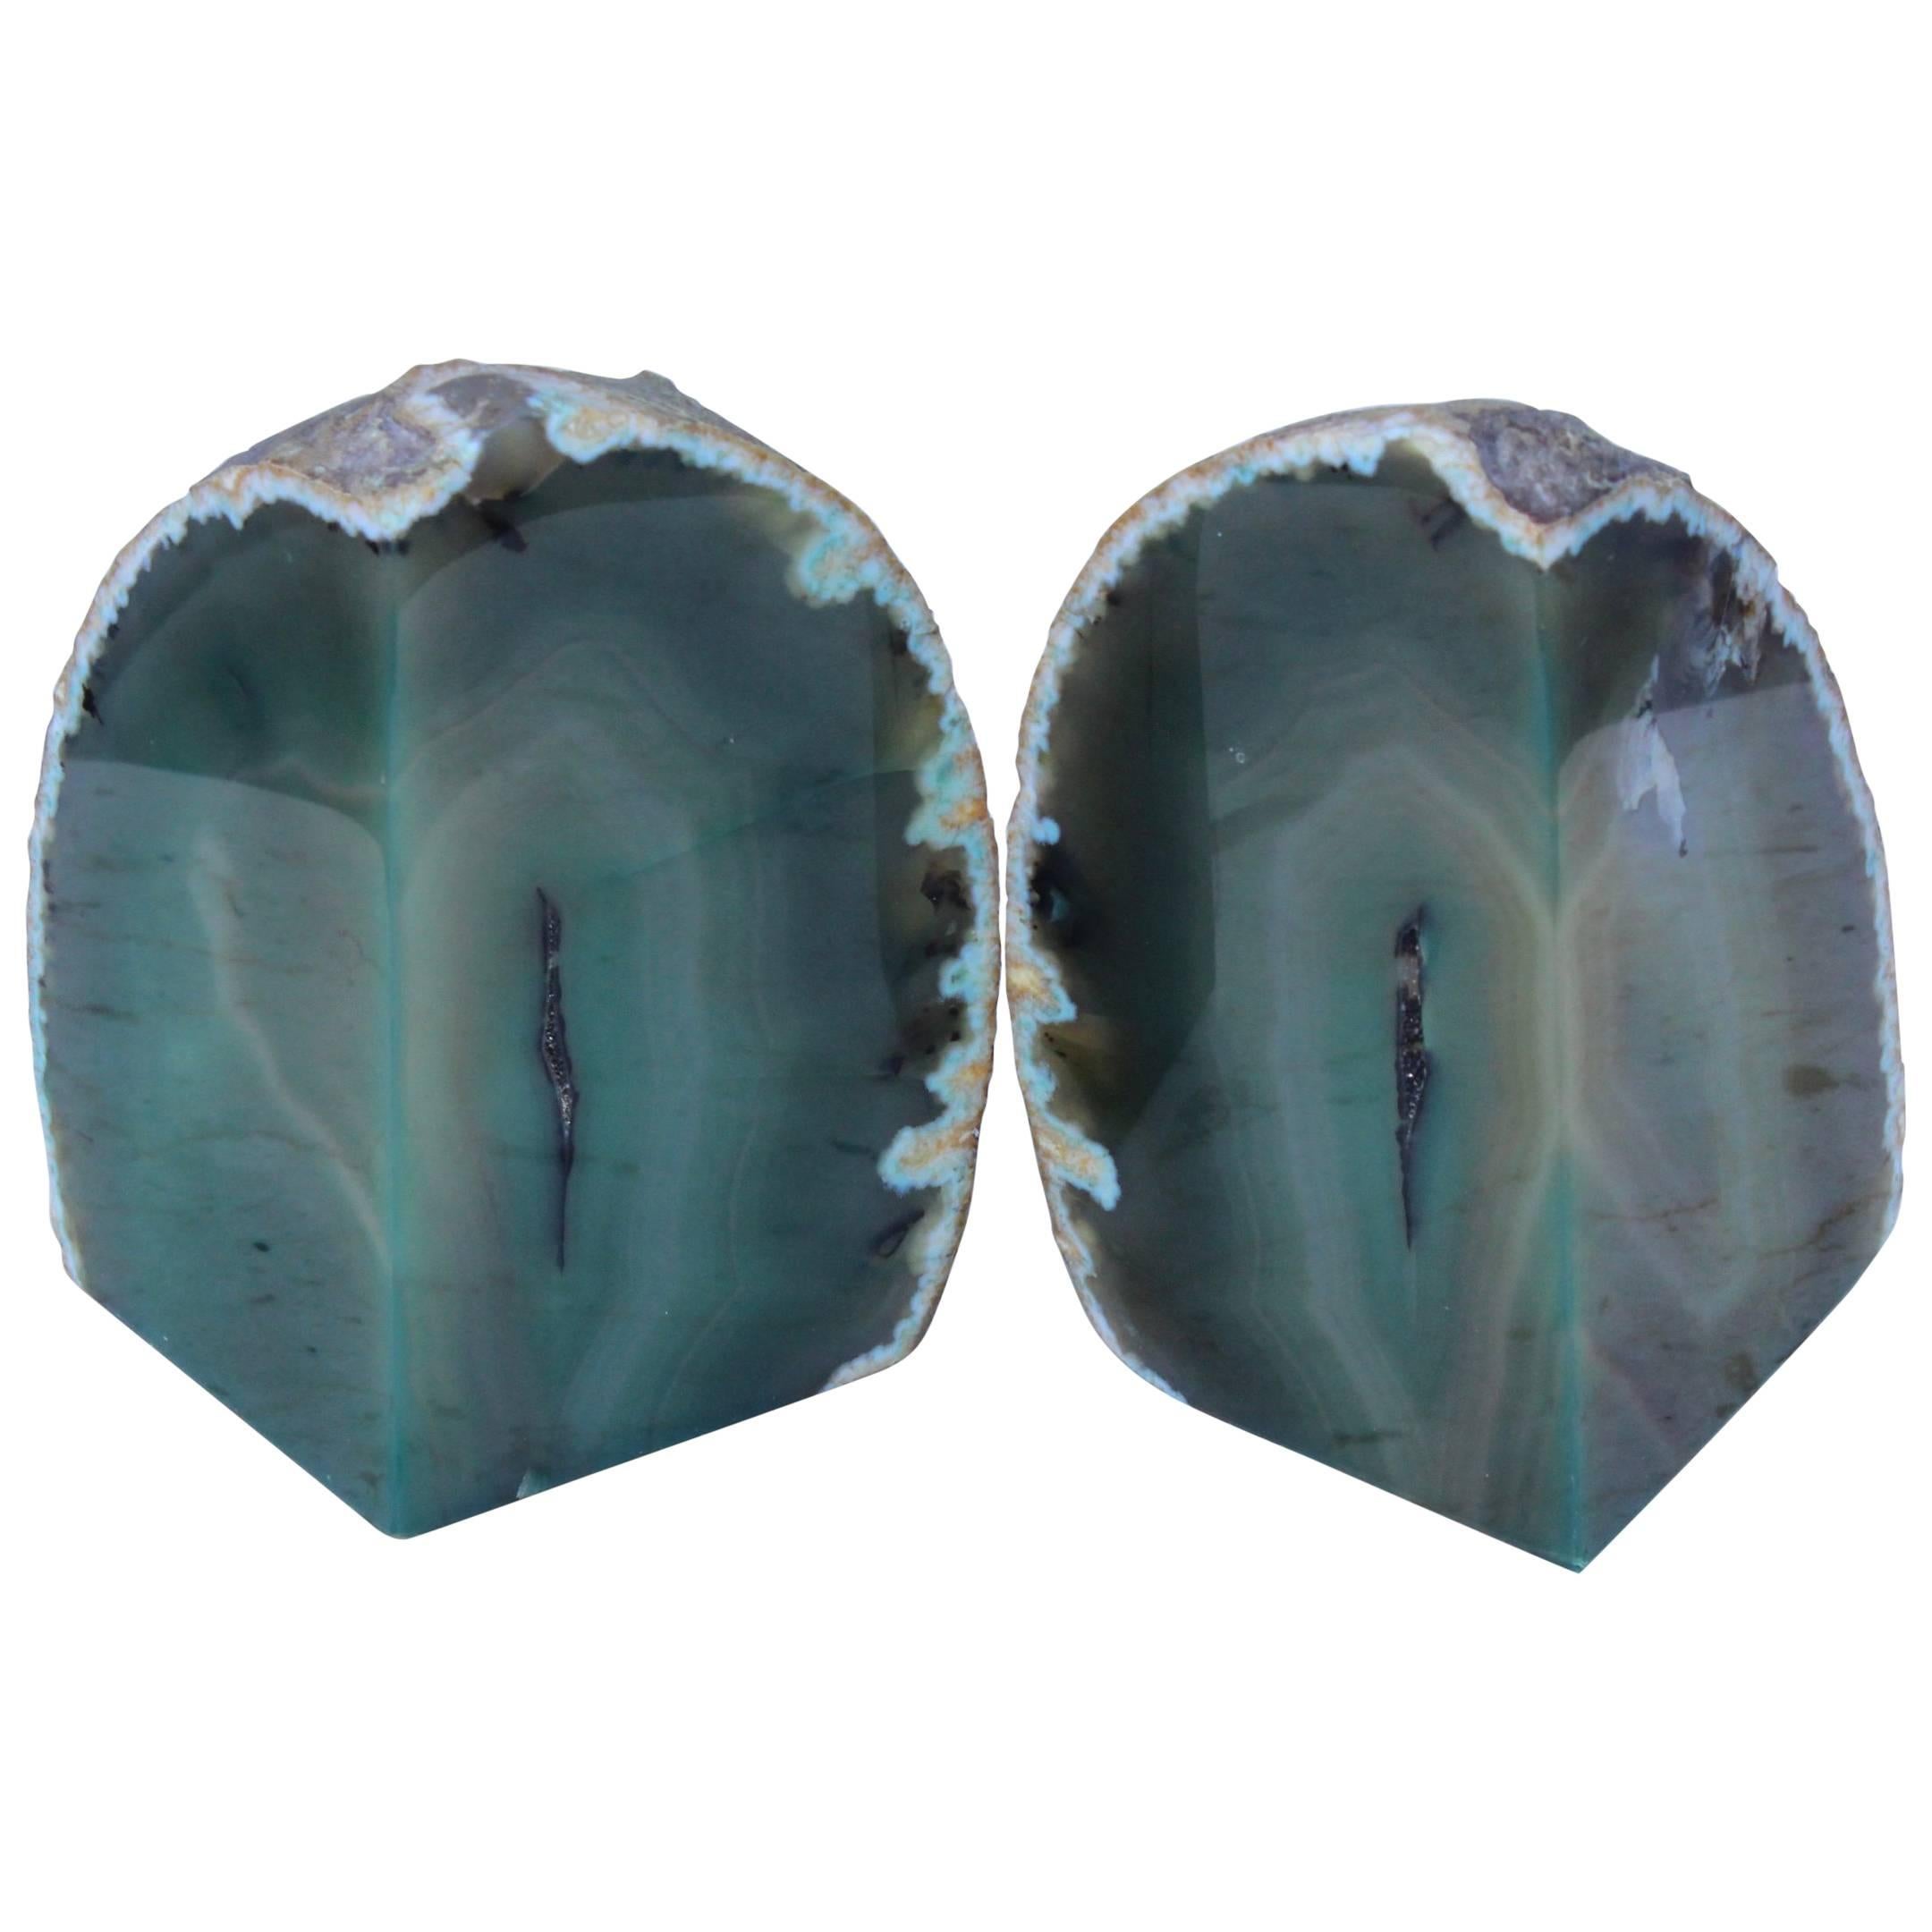 Agate Modern Bookends